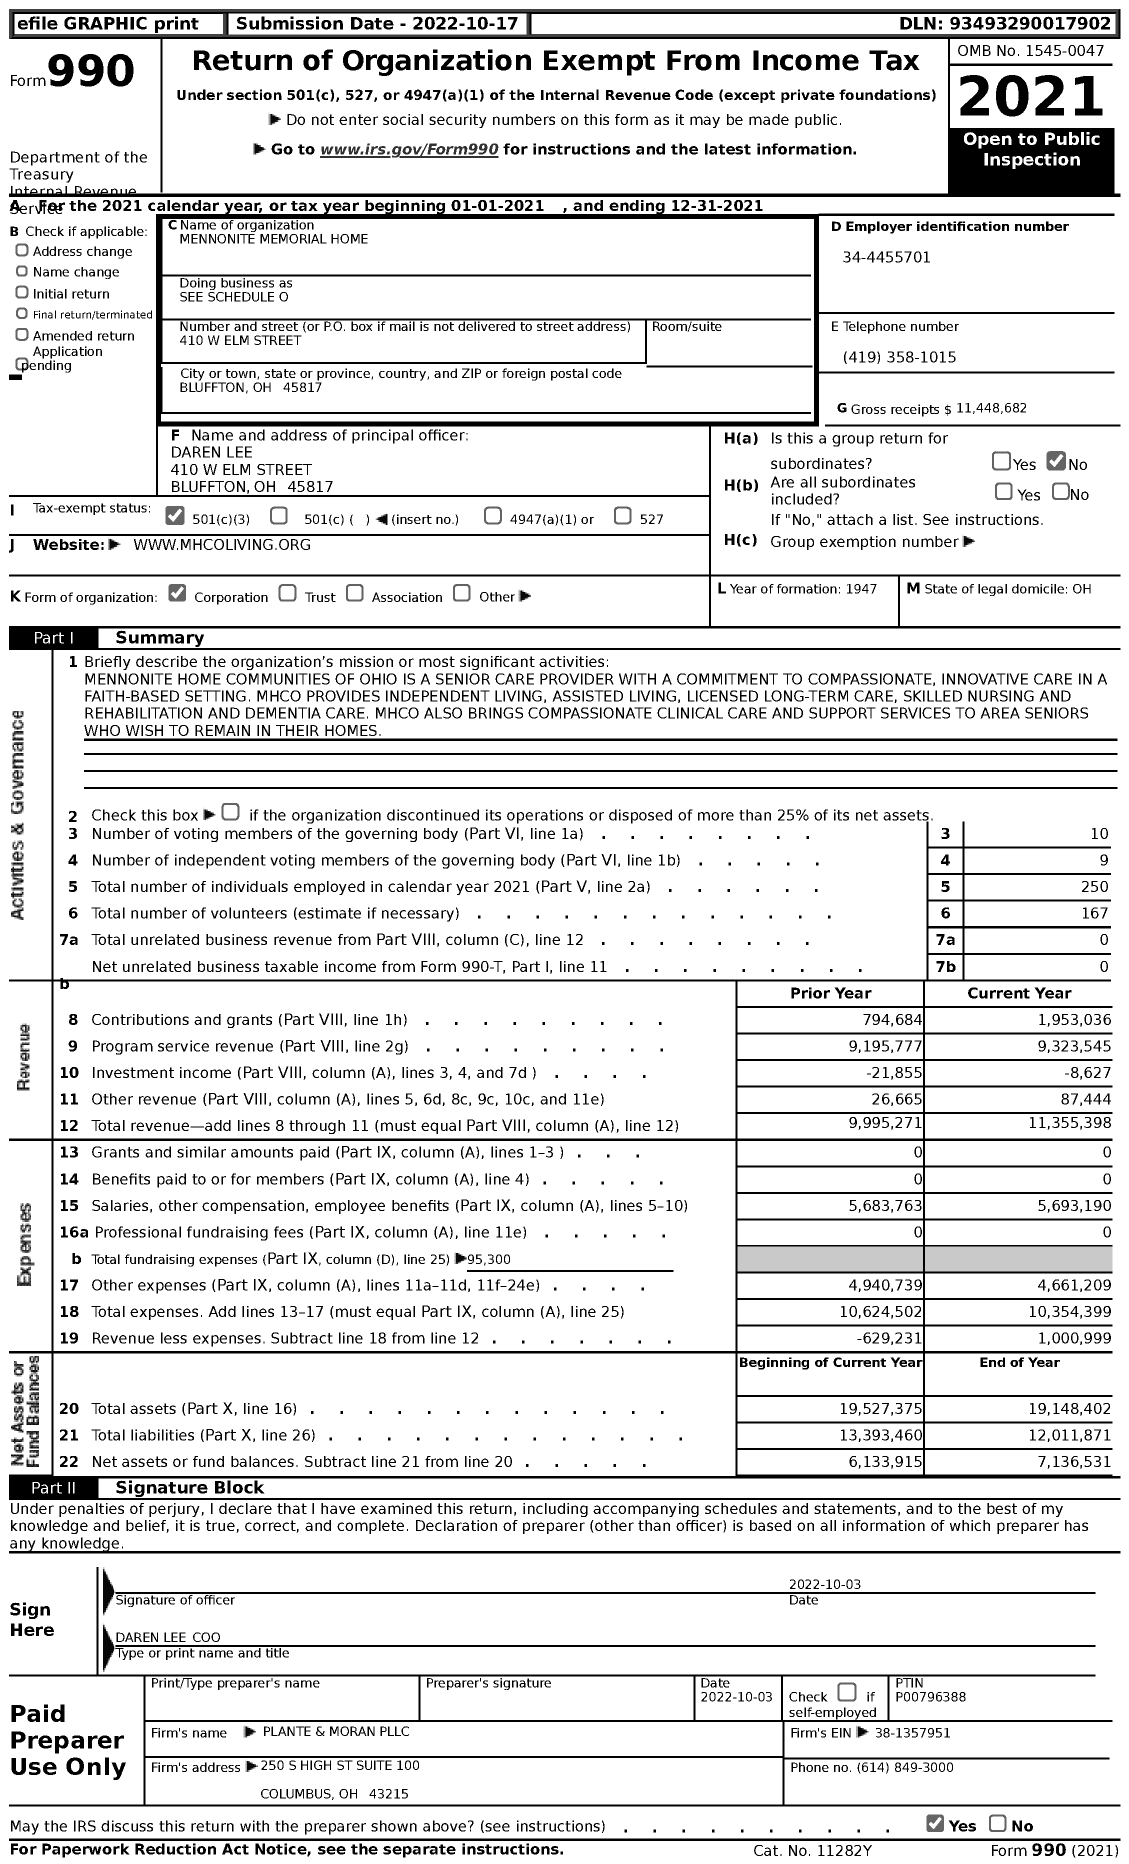 Image of first page of 2021 Form 990 for Mennonite Home Communities of Ohio (MHCO)